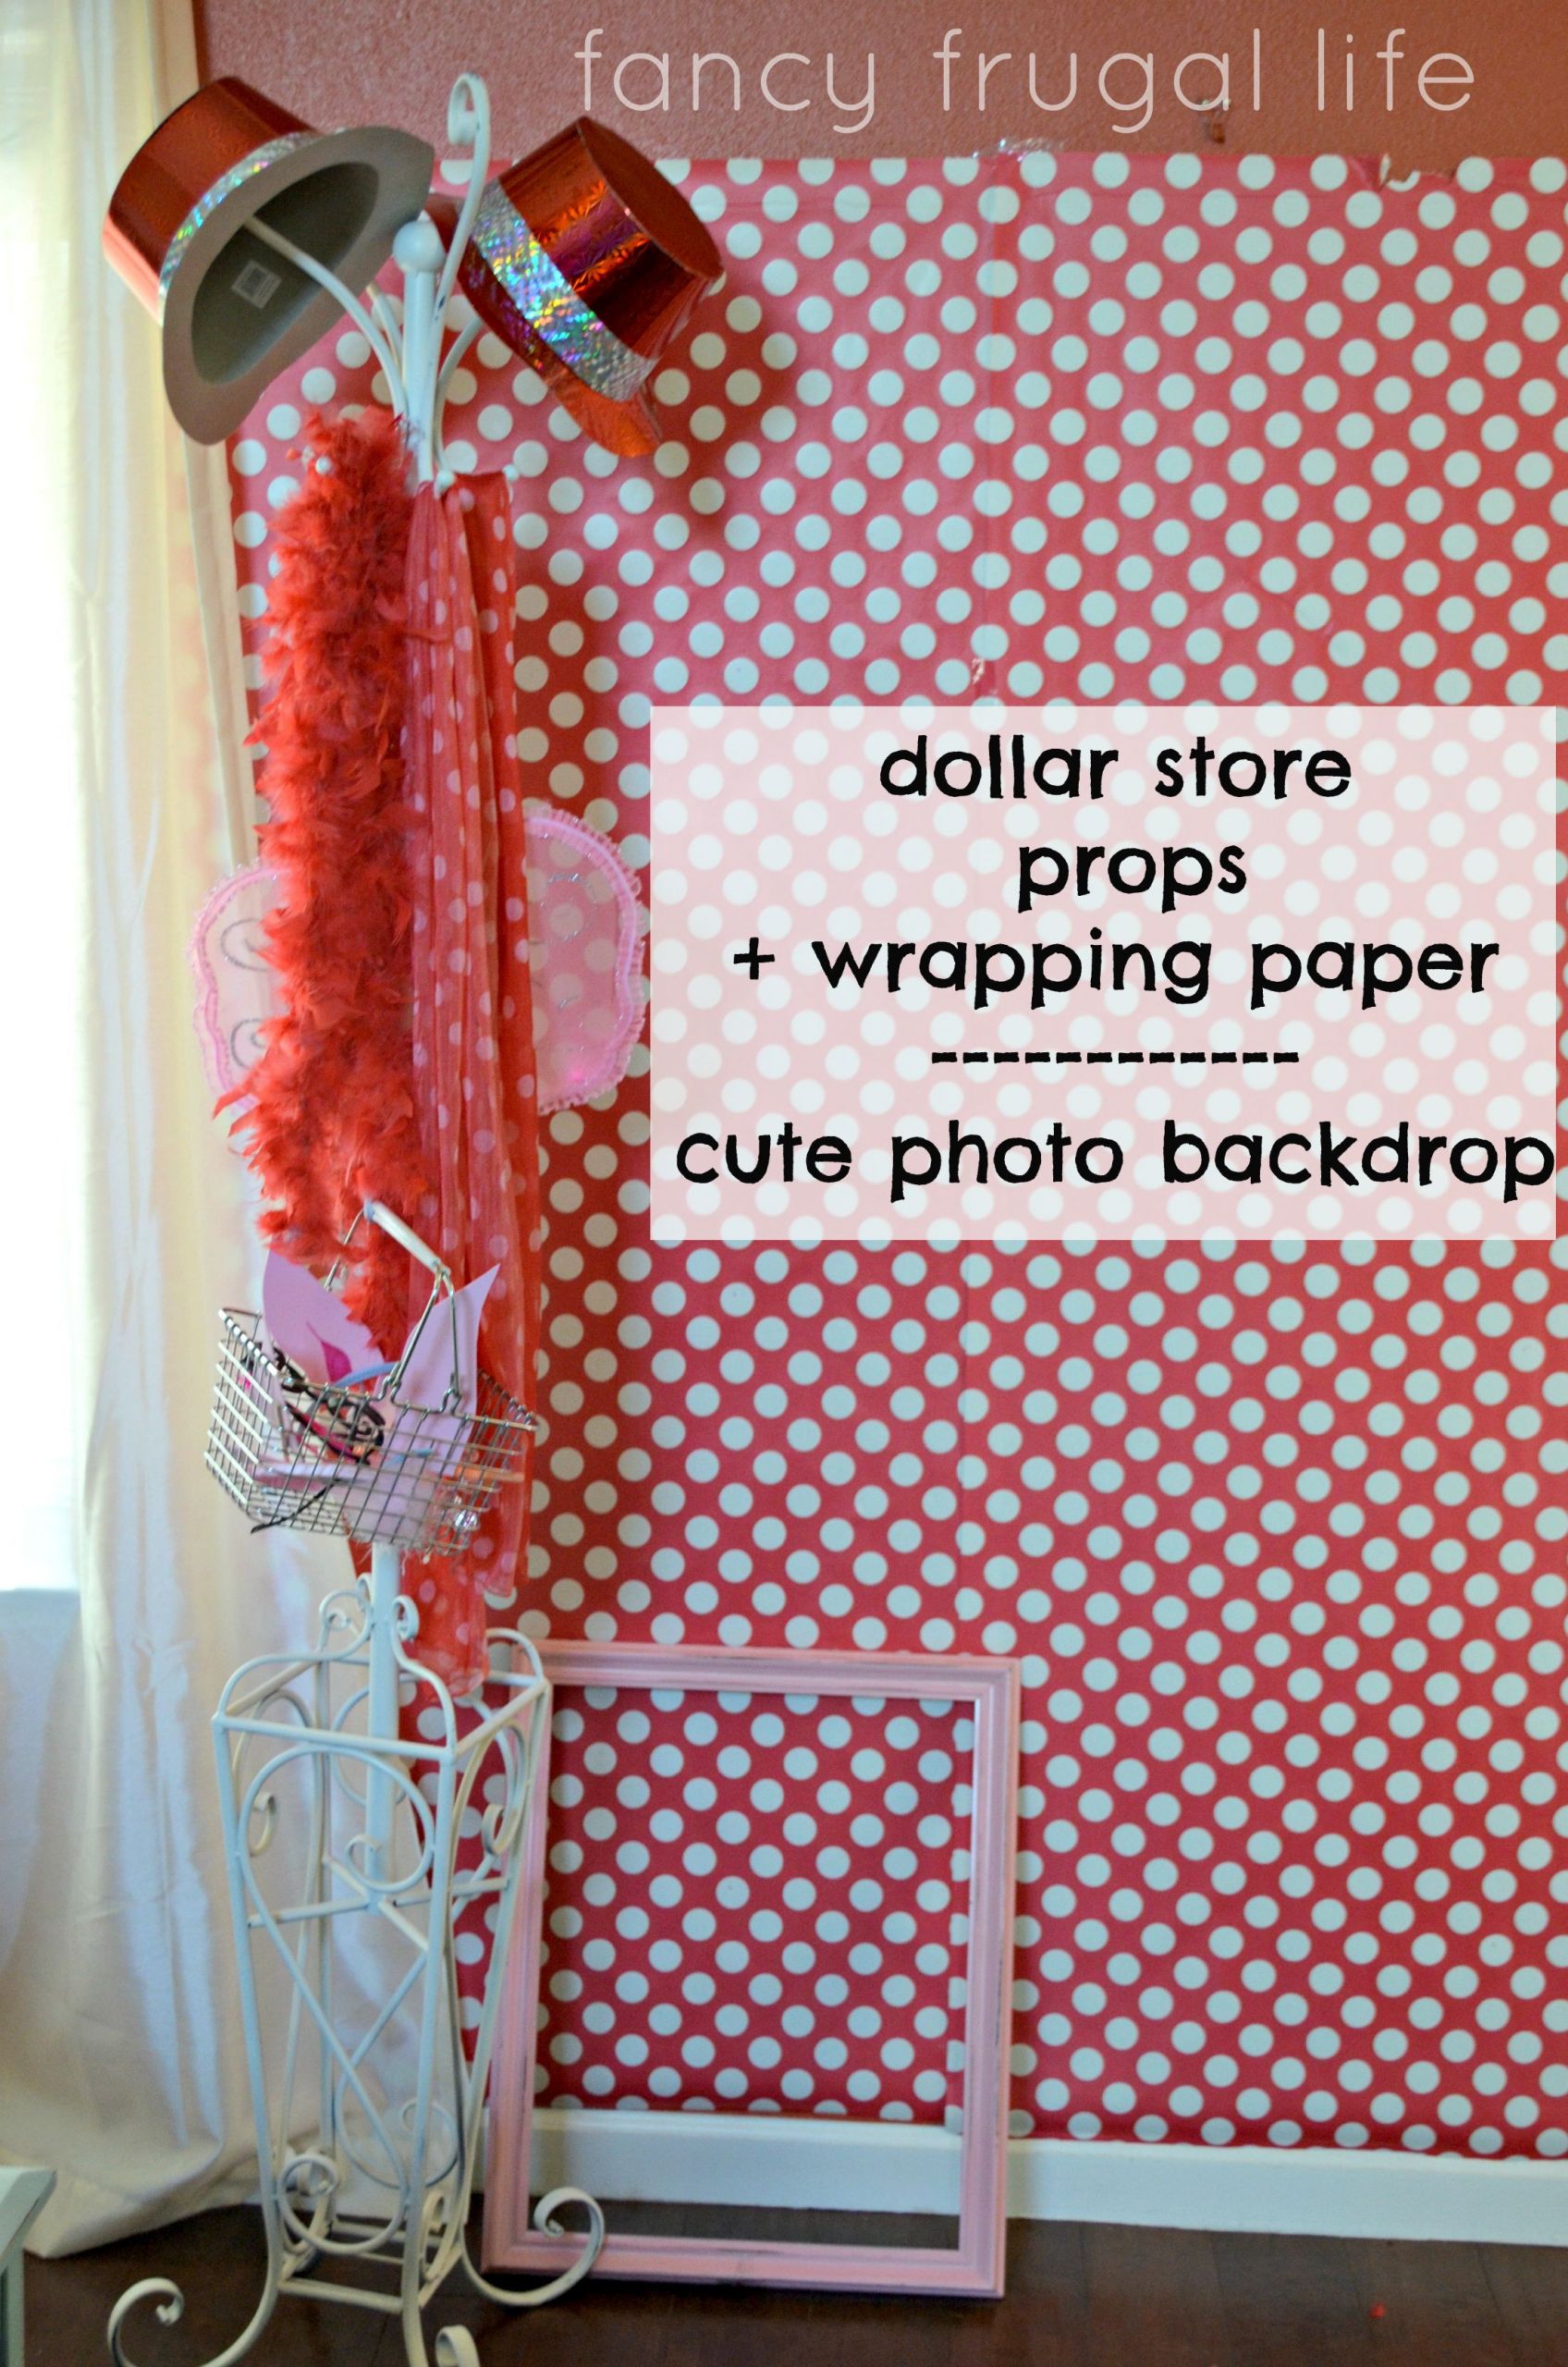 Christmas Party Photo Booth Ideas
 wrapping paper dollar store photo props=fun party photo